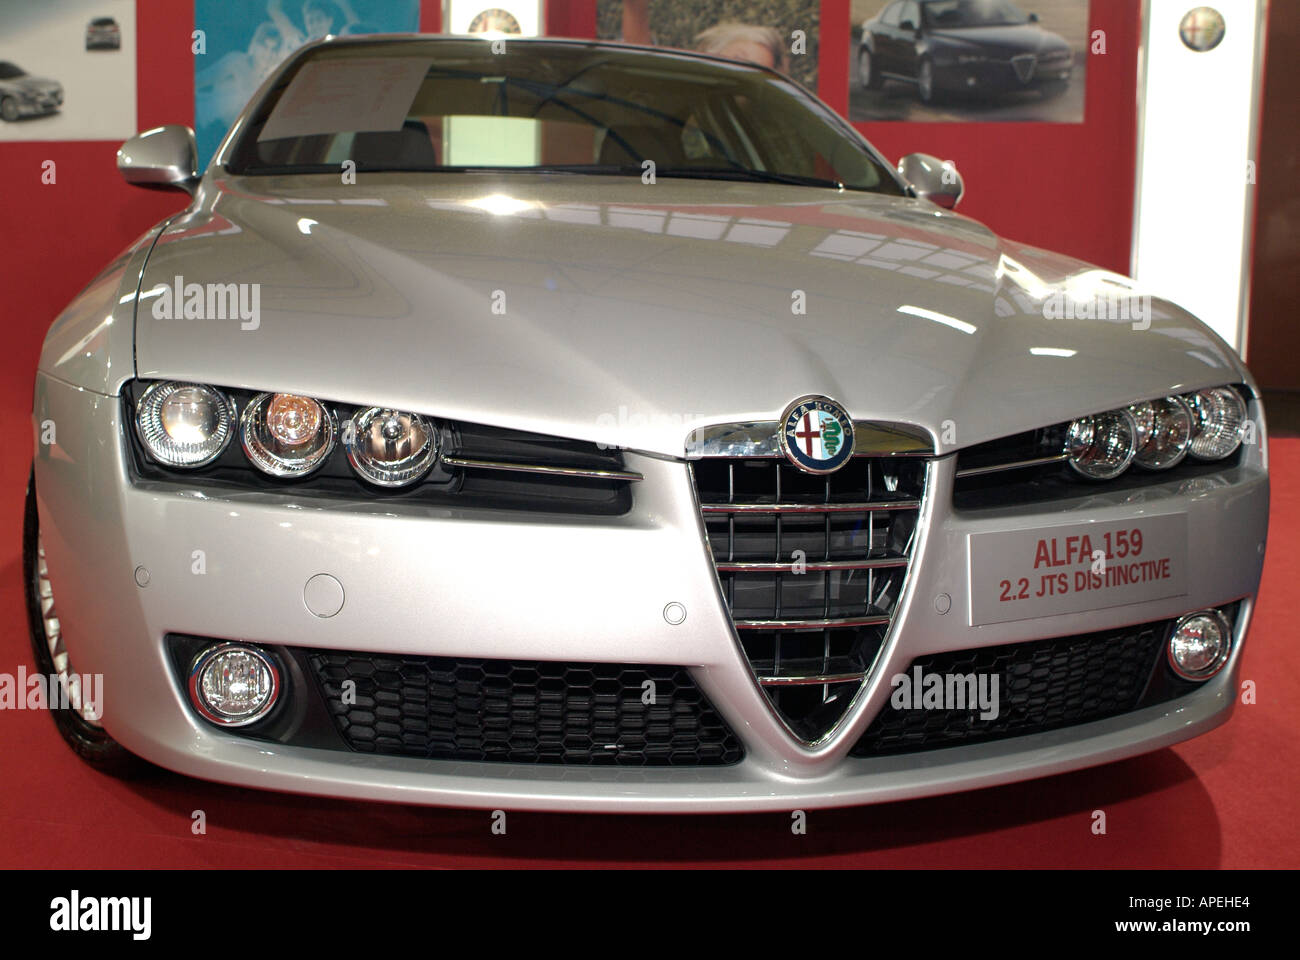 Alfa Romeo 159 – The Time is Now